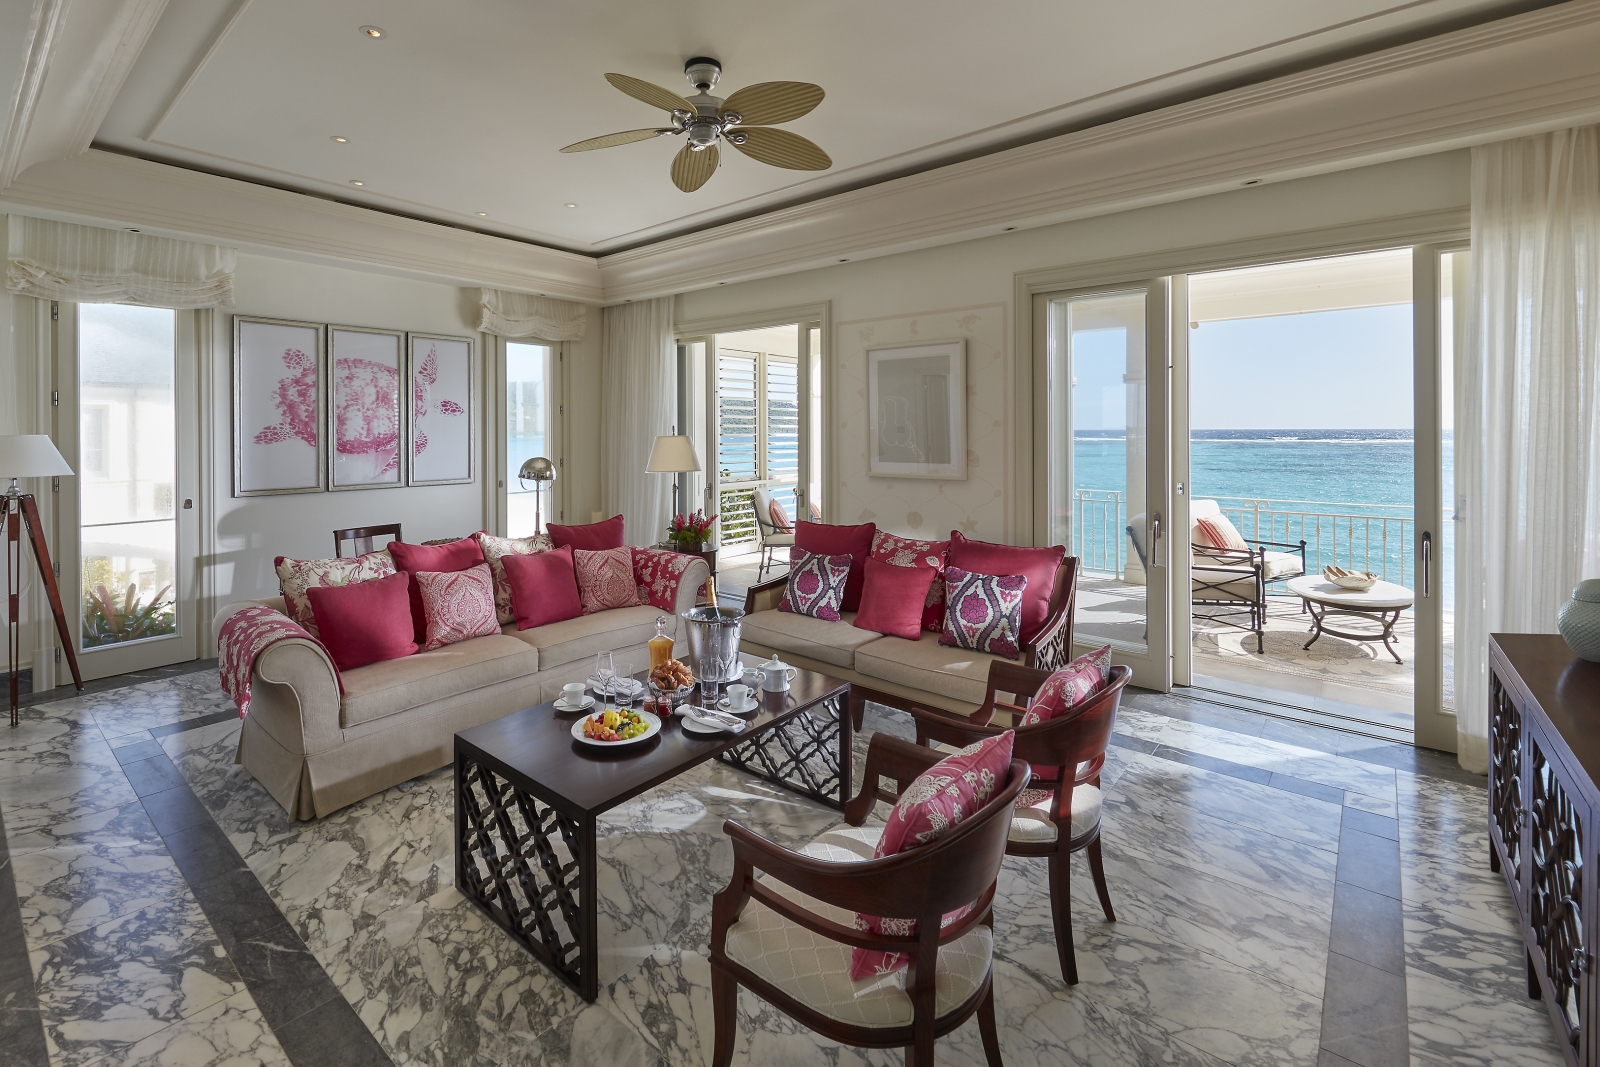 The living room of the Penthouse Suite with a terrace overlooking the ocean